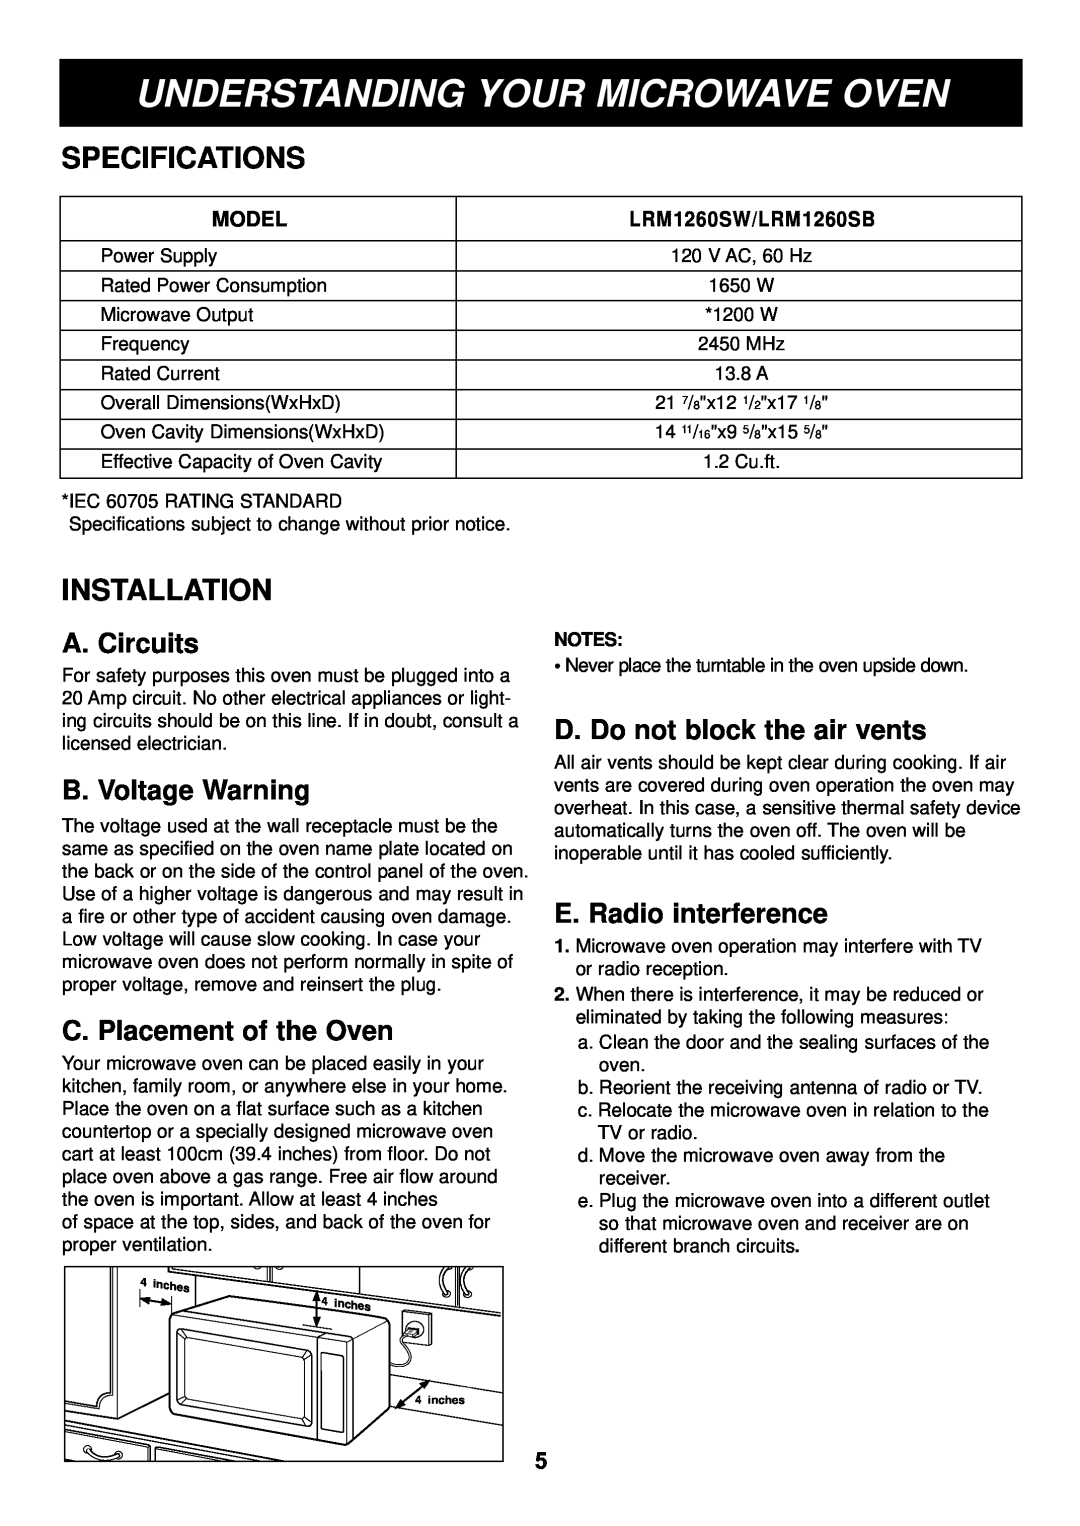 LG Electronics LRM1260SB Understanding Your Microwave Oven, Specifications, Installation, A. Circuits, B. Voltage Warning 